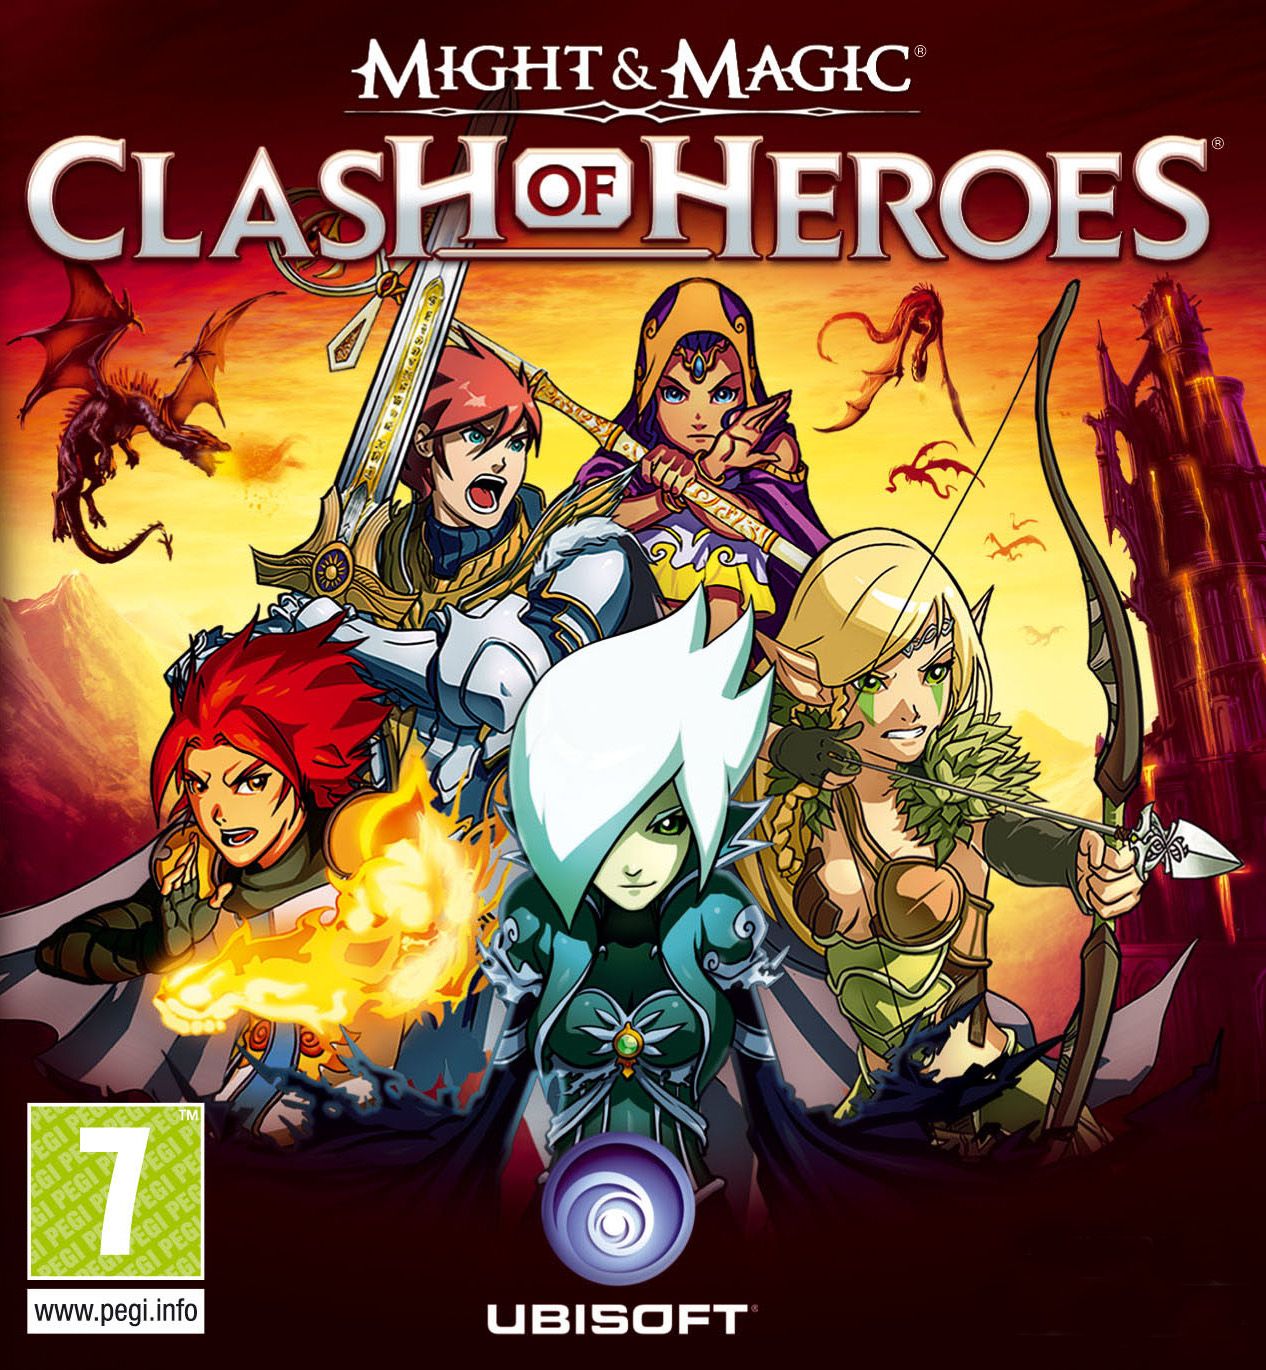 download heroes of might and magic clash of heroes